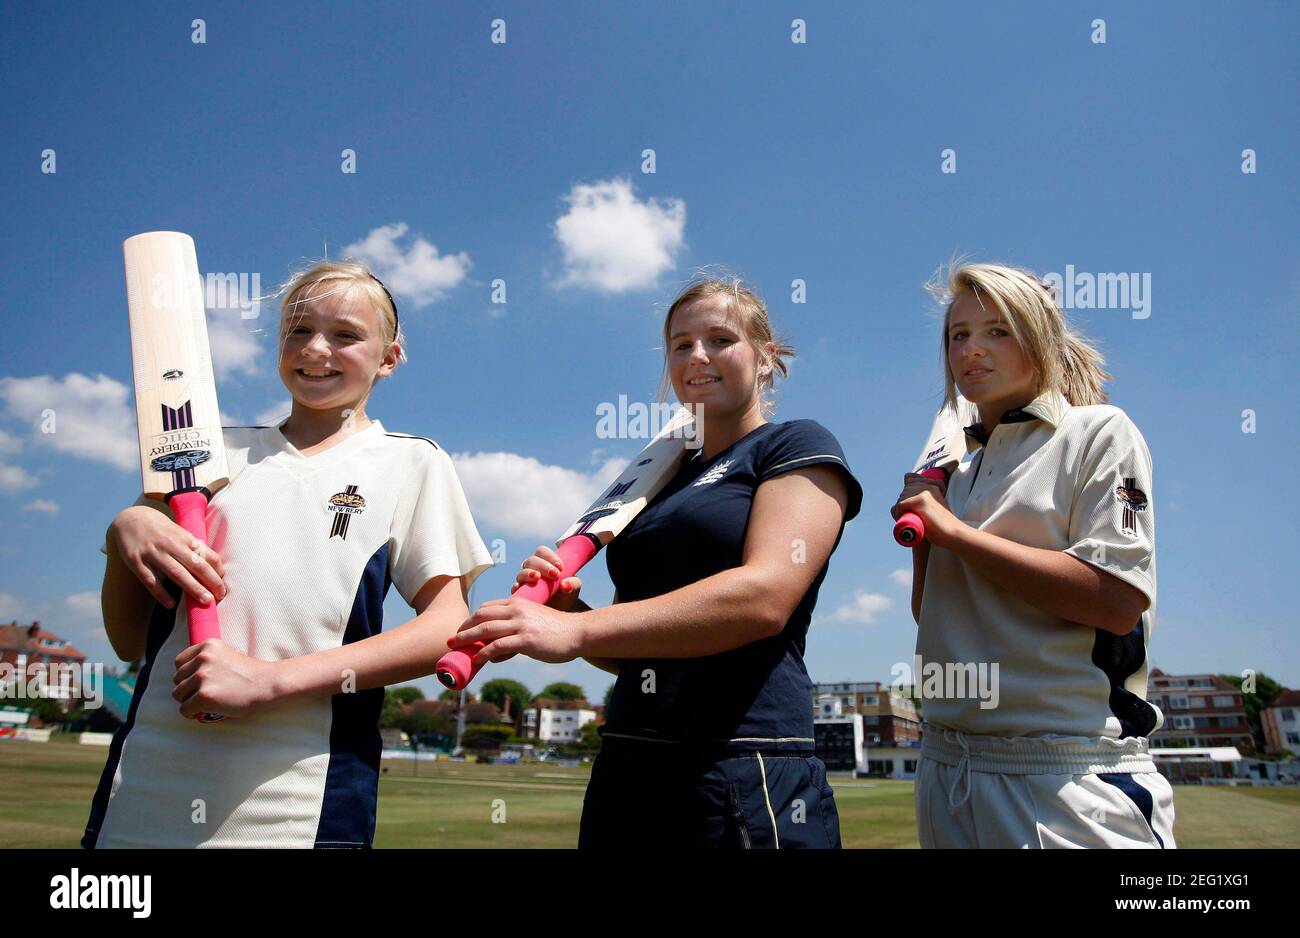 Cricket Newbery Launch The Chic The First Ever Cricket Bat For Women The County Ground Hove 23 6 09 England S Holly Colvin C Holly Goble L And Chiara Green R